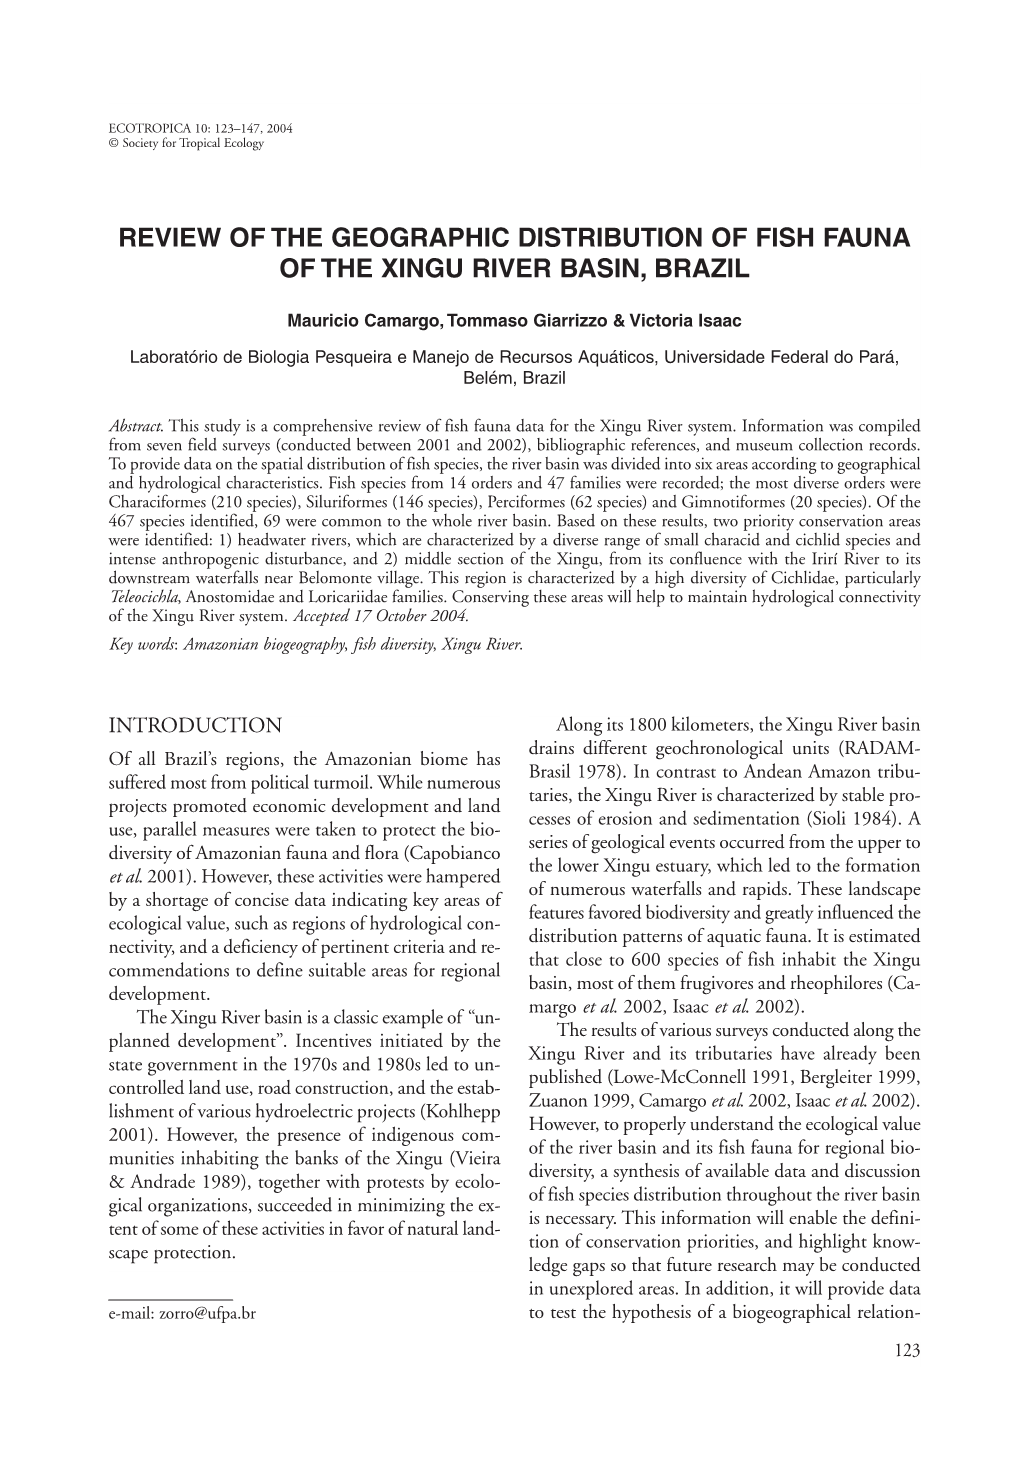 Review of the Geographic Distribution of Fish Fauna of the Xingu River Basin, Brazil